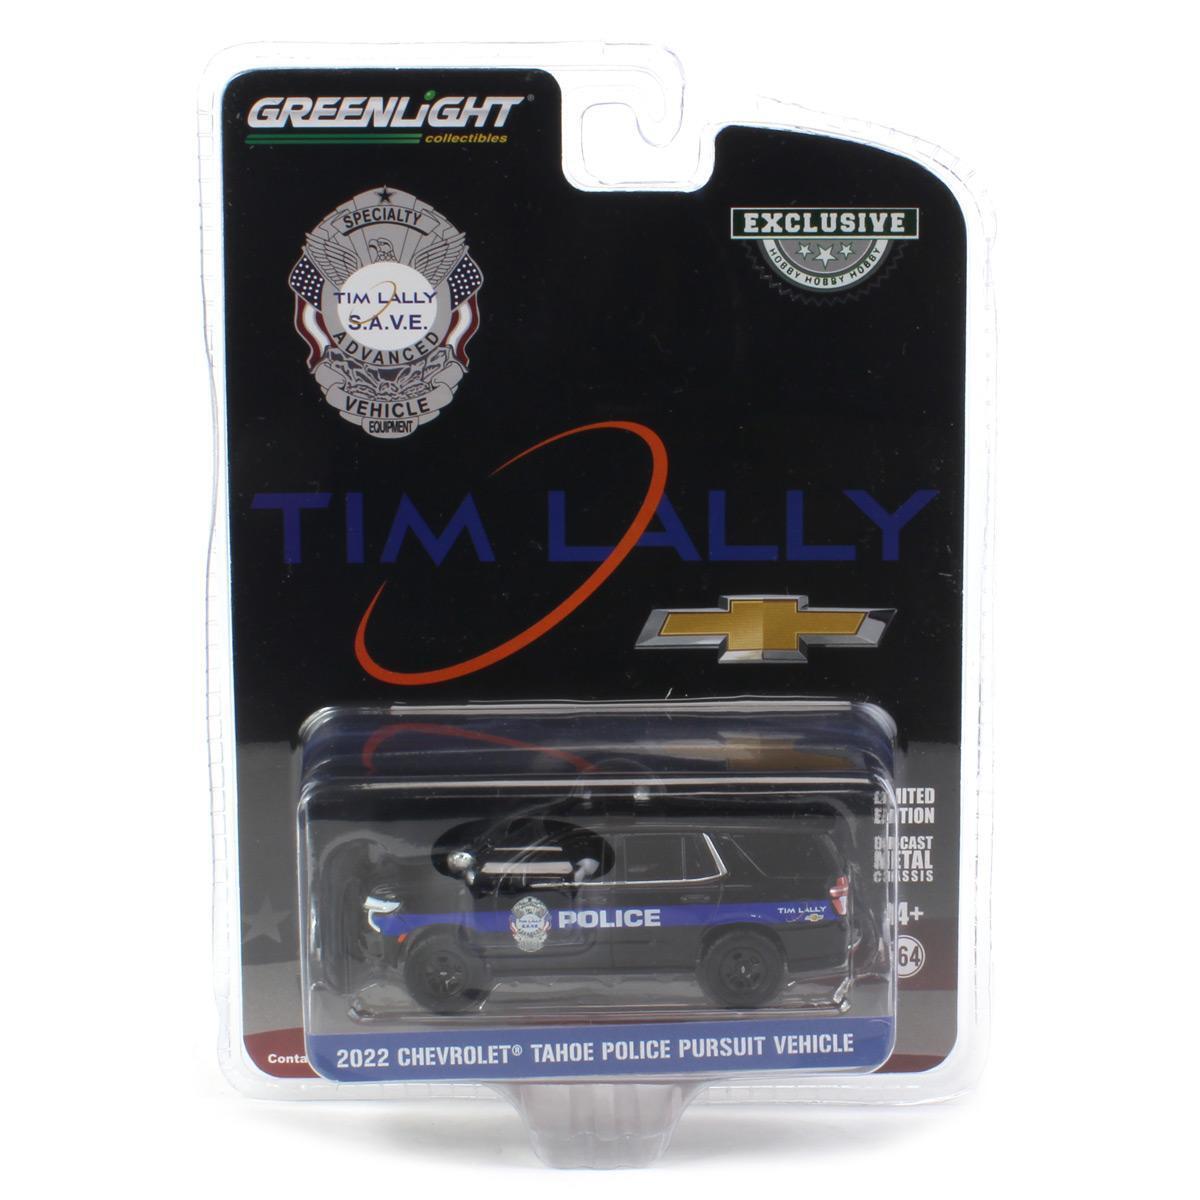 GreenLight 1:64 2022 Chevrolet Tahoe Police Pursuit Vehicle (PPV) - Tim Lally Chevrolet, Warrensville Heights, Ohio 30443